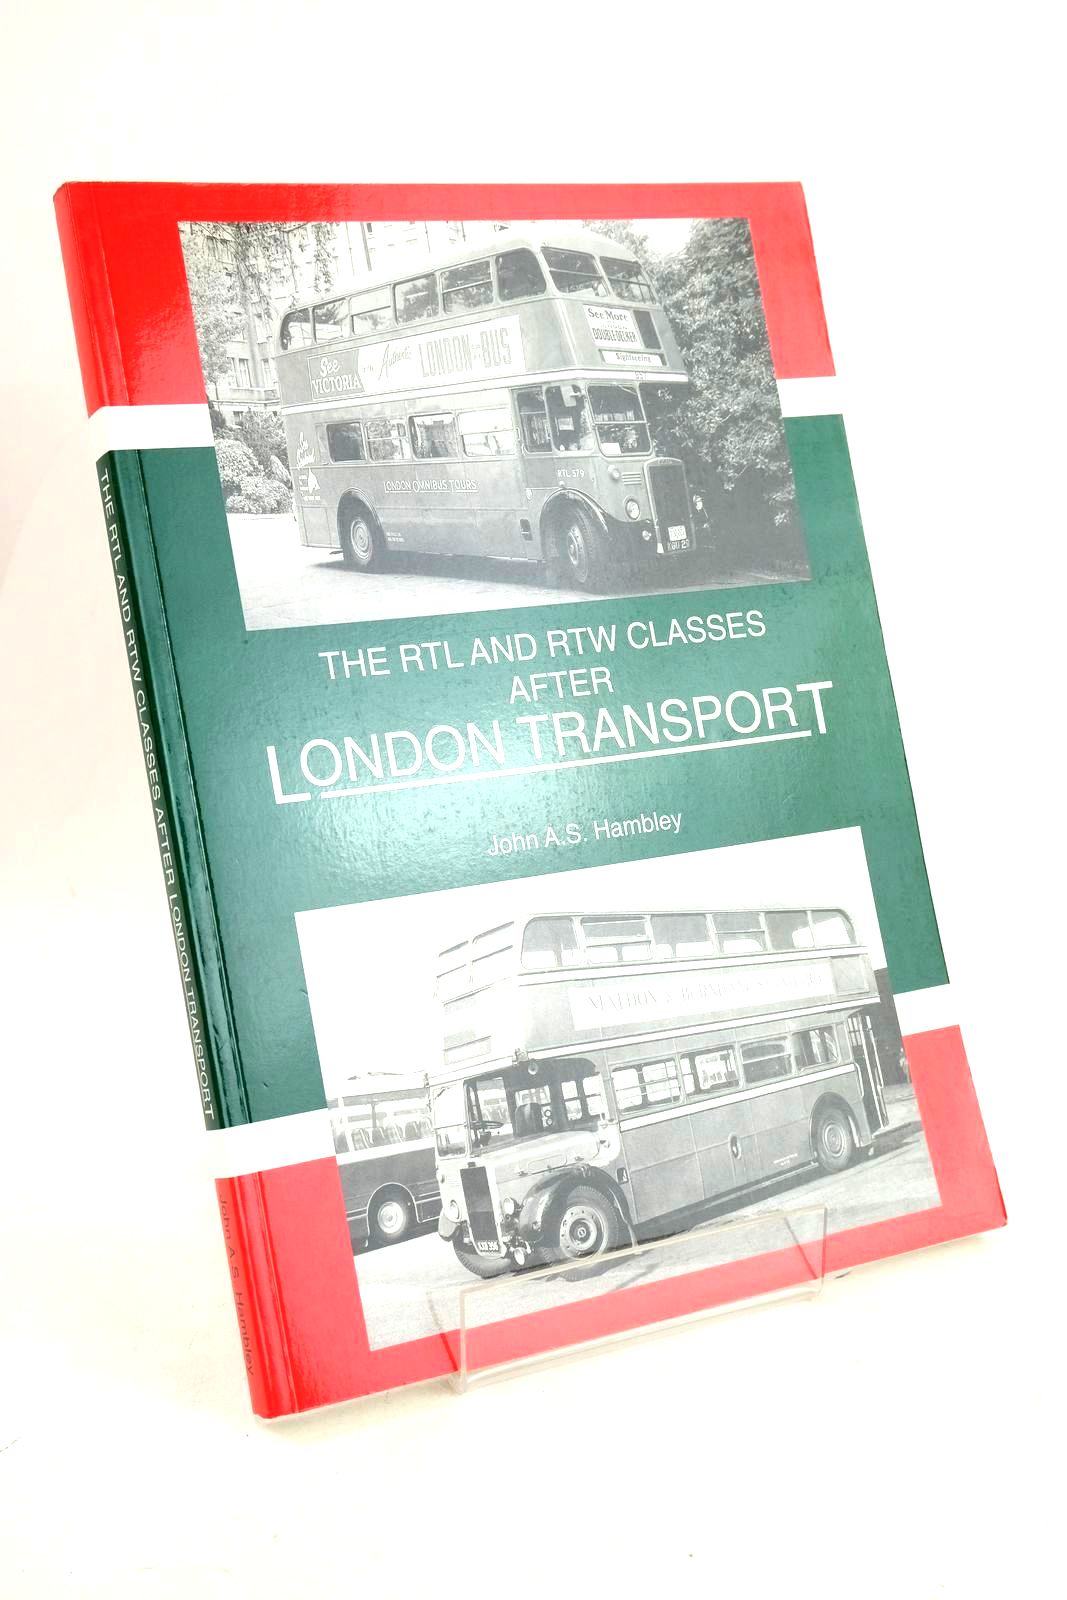 Photo of THE RTL &amp; RTW CLASSES AFTER LONDON TRANSPORT written by Hambley, John A.S. published by John A.S. Hambley (STOCK CODE: 1327373)  for sale by Stella & Rose's Books